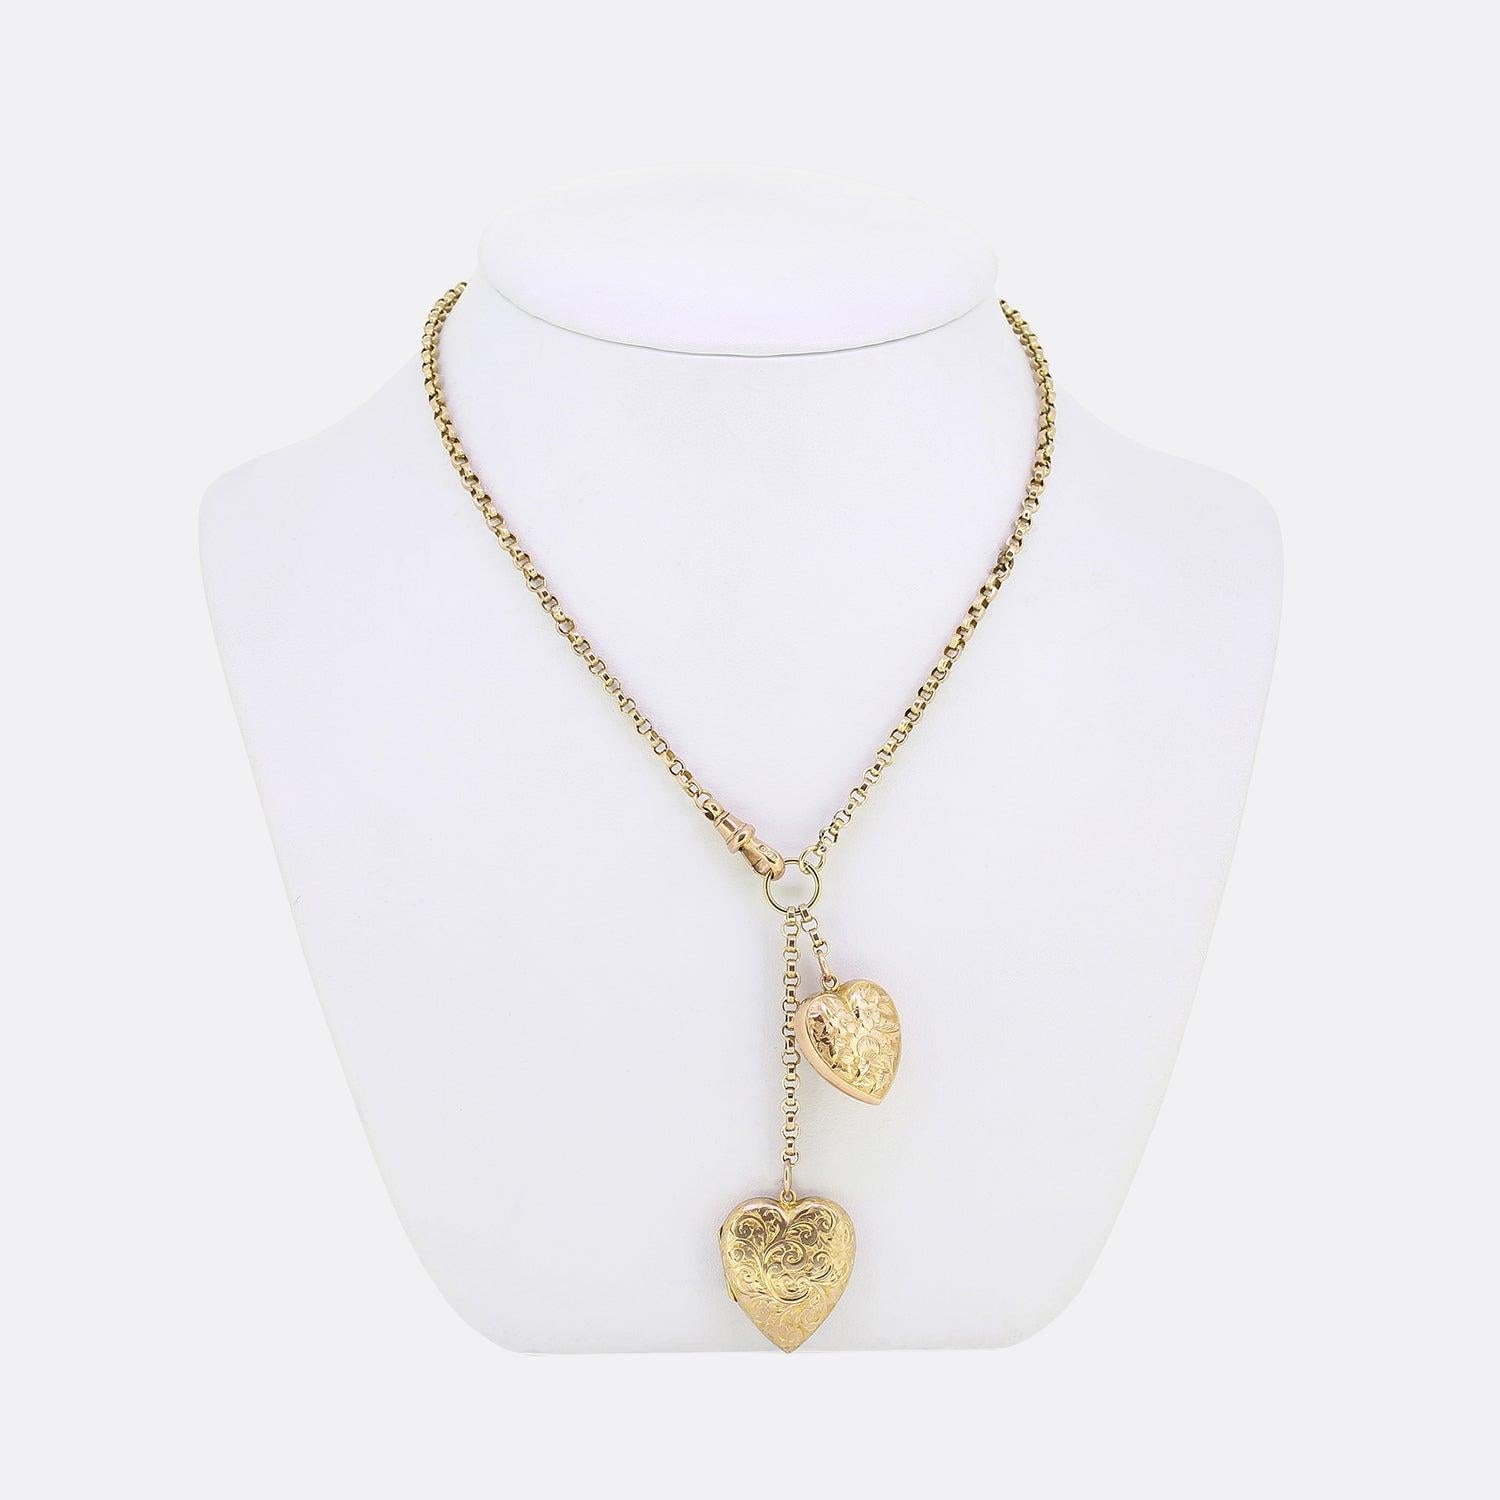 This is a vintage 9ct yellow gold belcher chain charm necklace. The necklace features two love heart pendants; both of which feature intricate floral engraving and the larger heart is a double sided locket. The necklace is securely attached by an